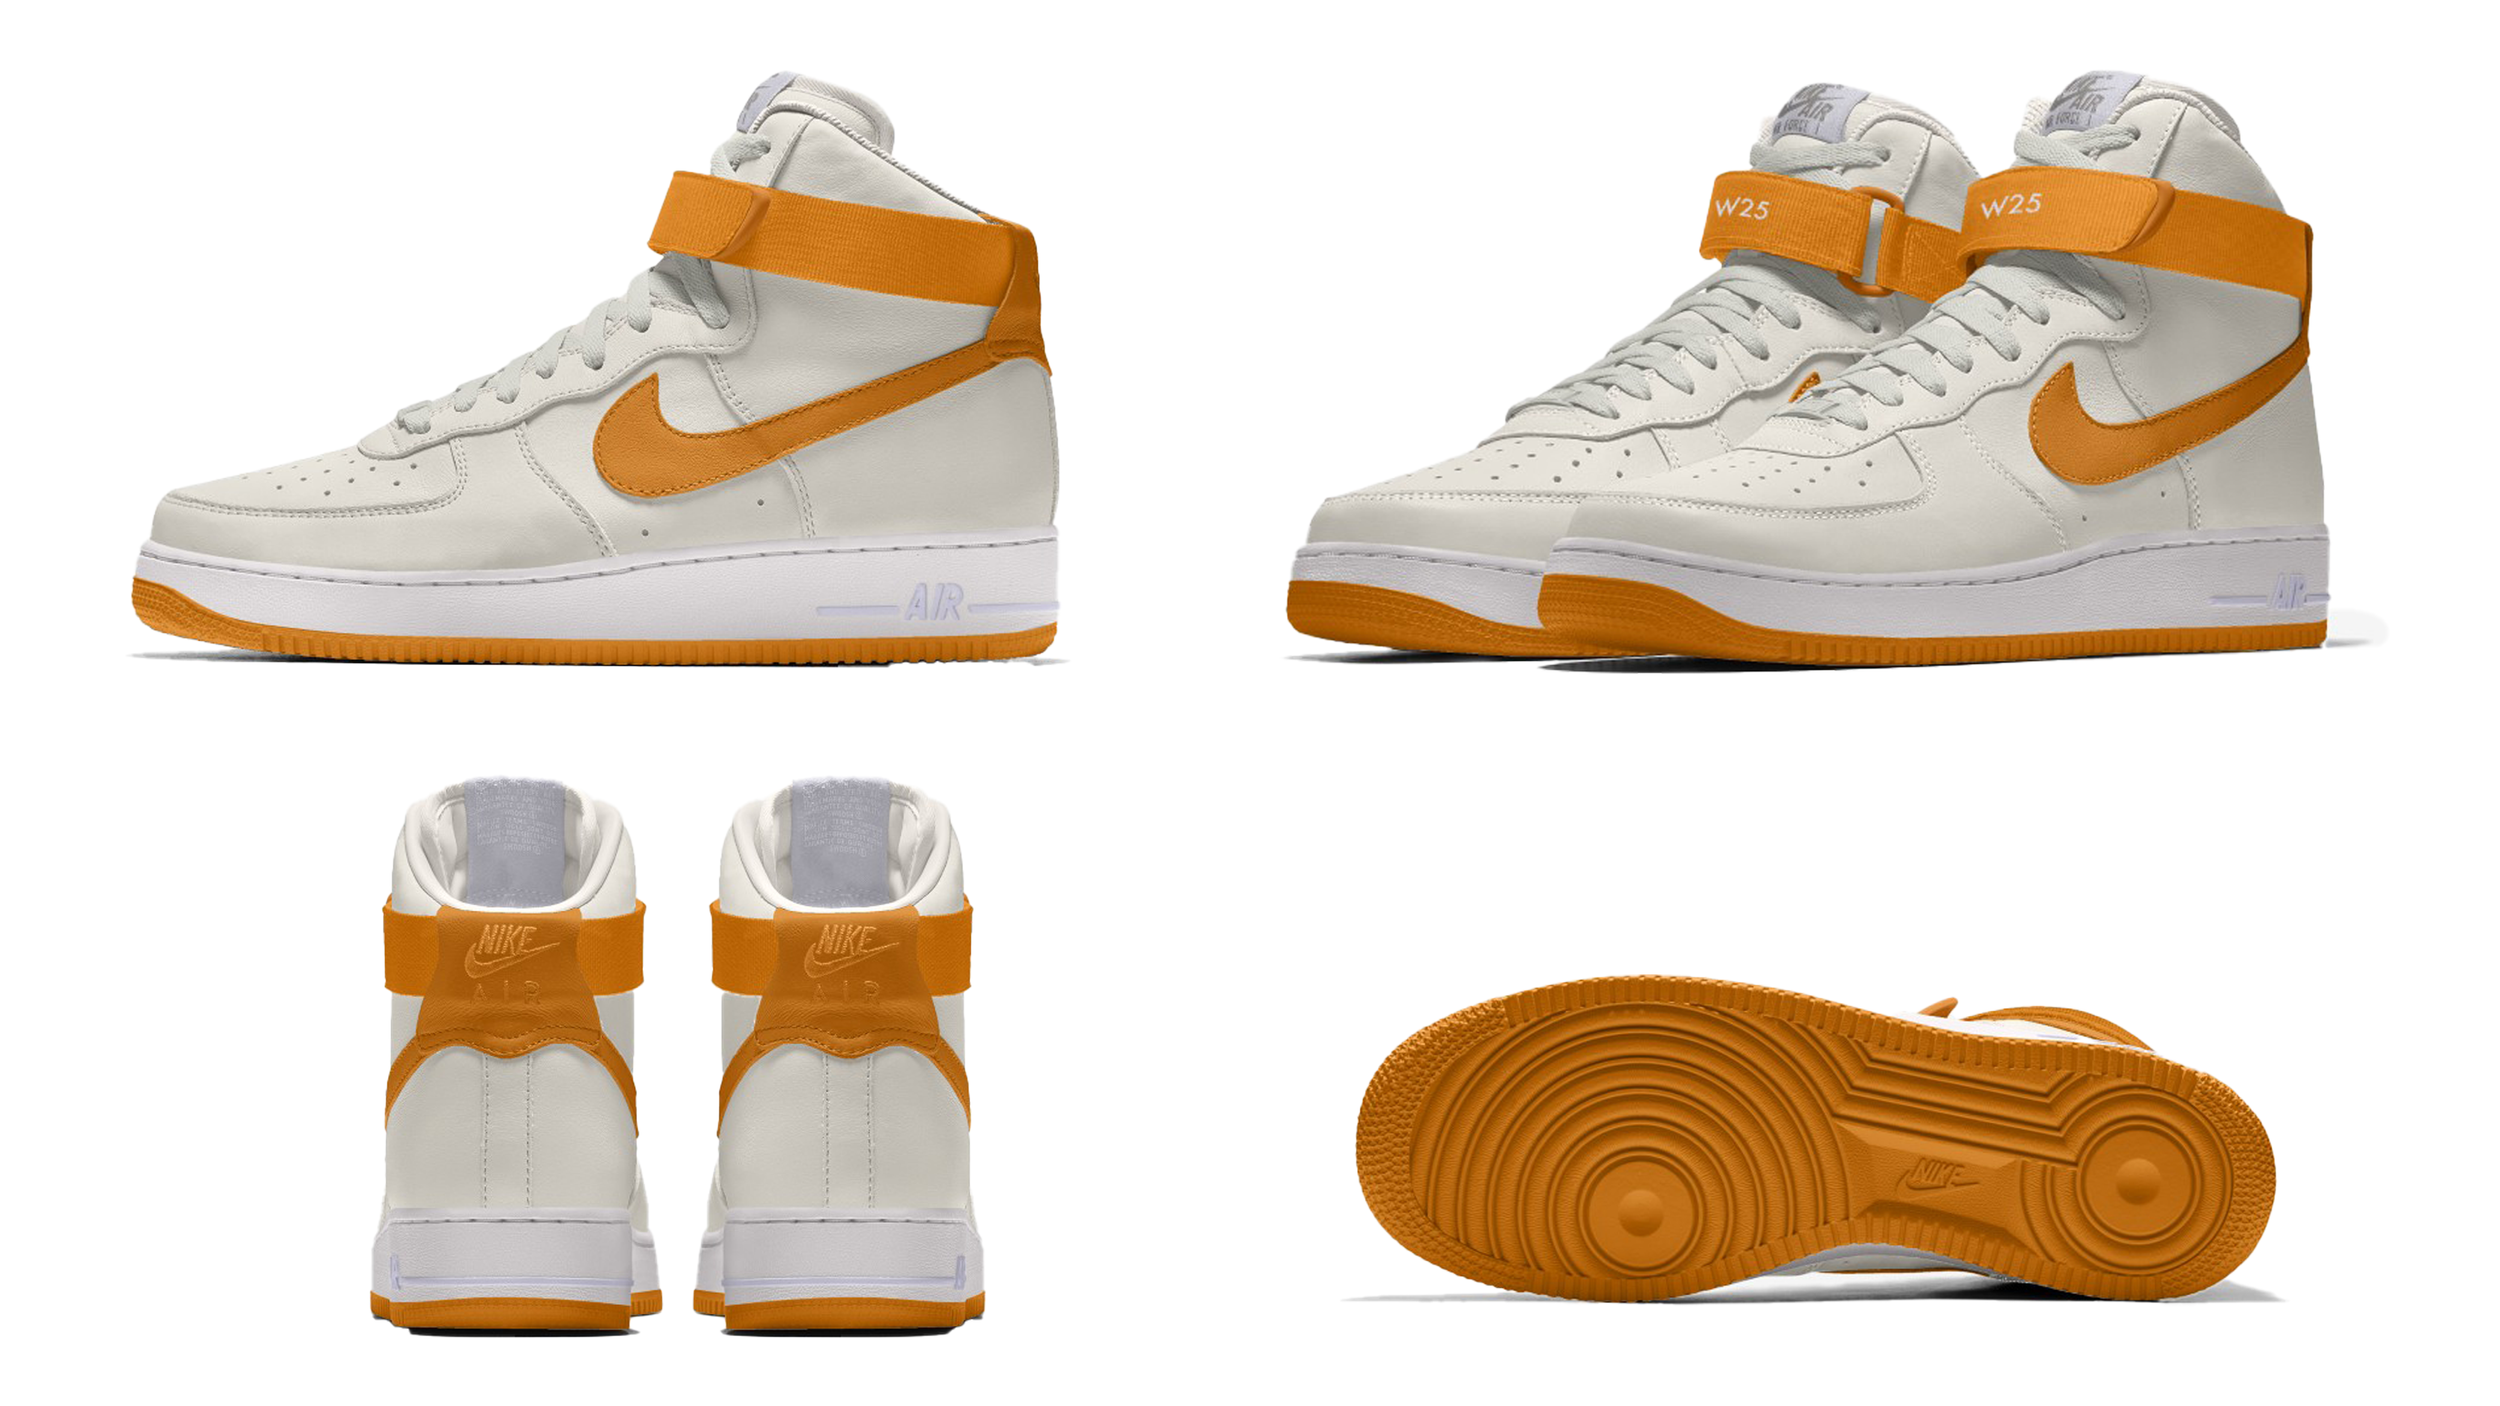  A special edition Air Force 1 would be perfect for this. A portion of the proceeds will be donated to the Women’s Sports Foundation, a non profit charity focused on female involvement in sports. 